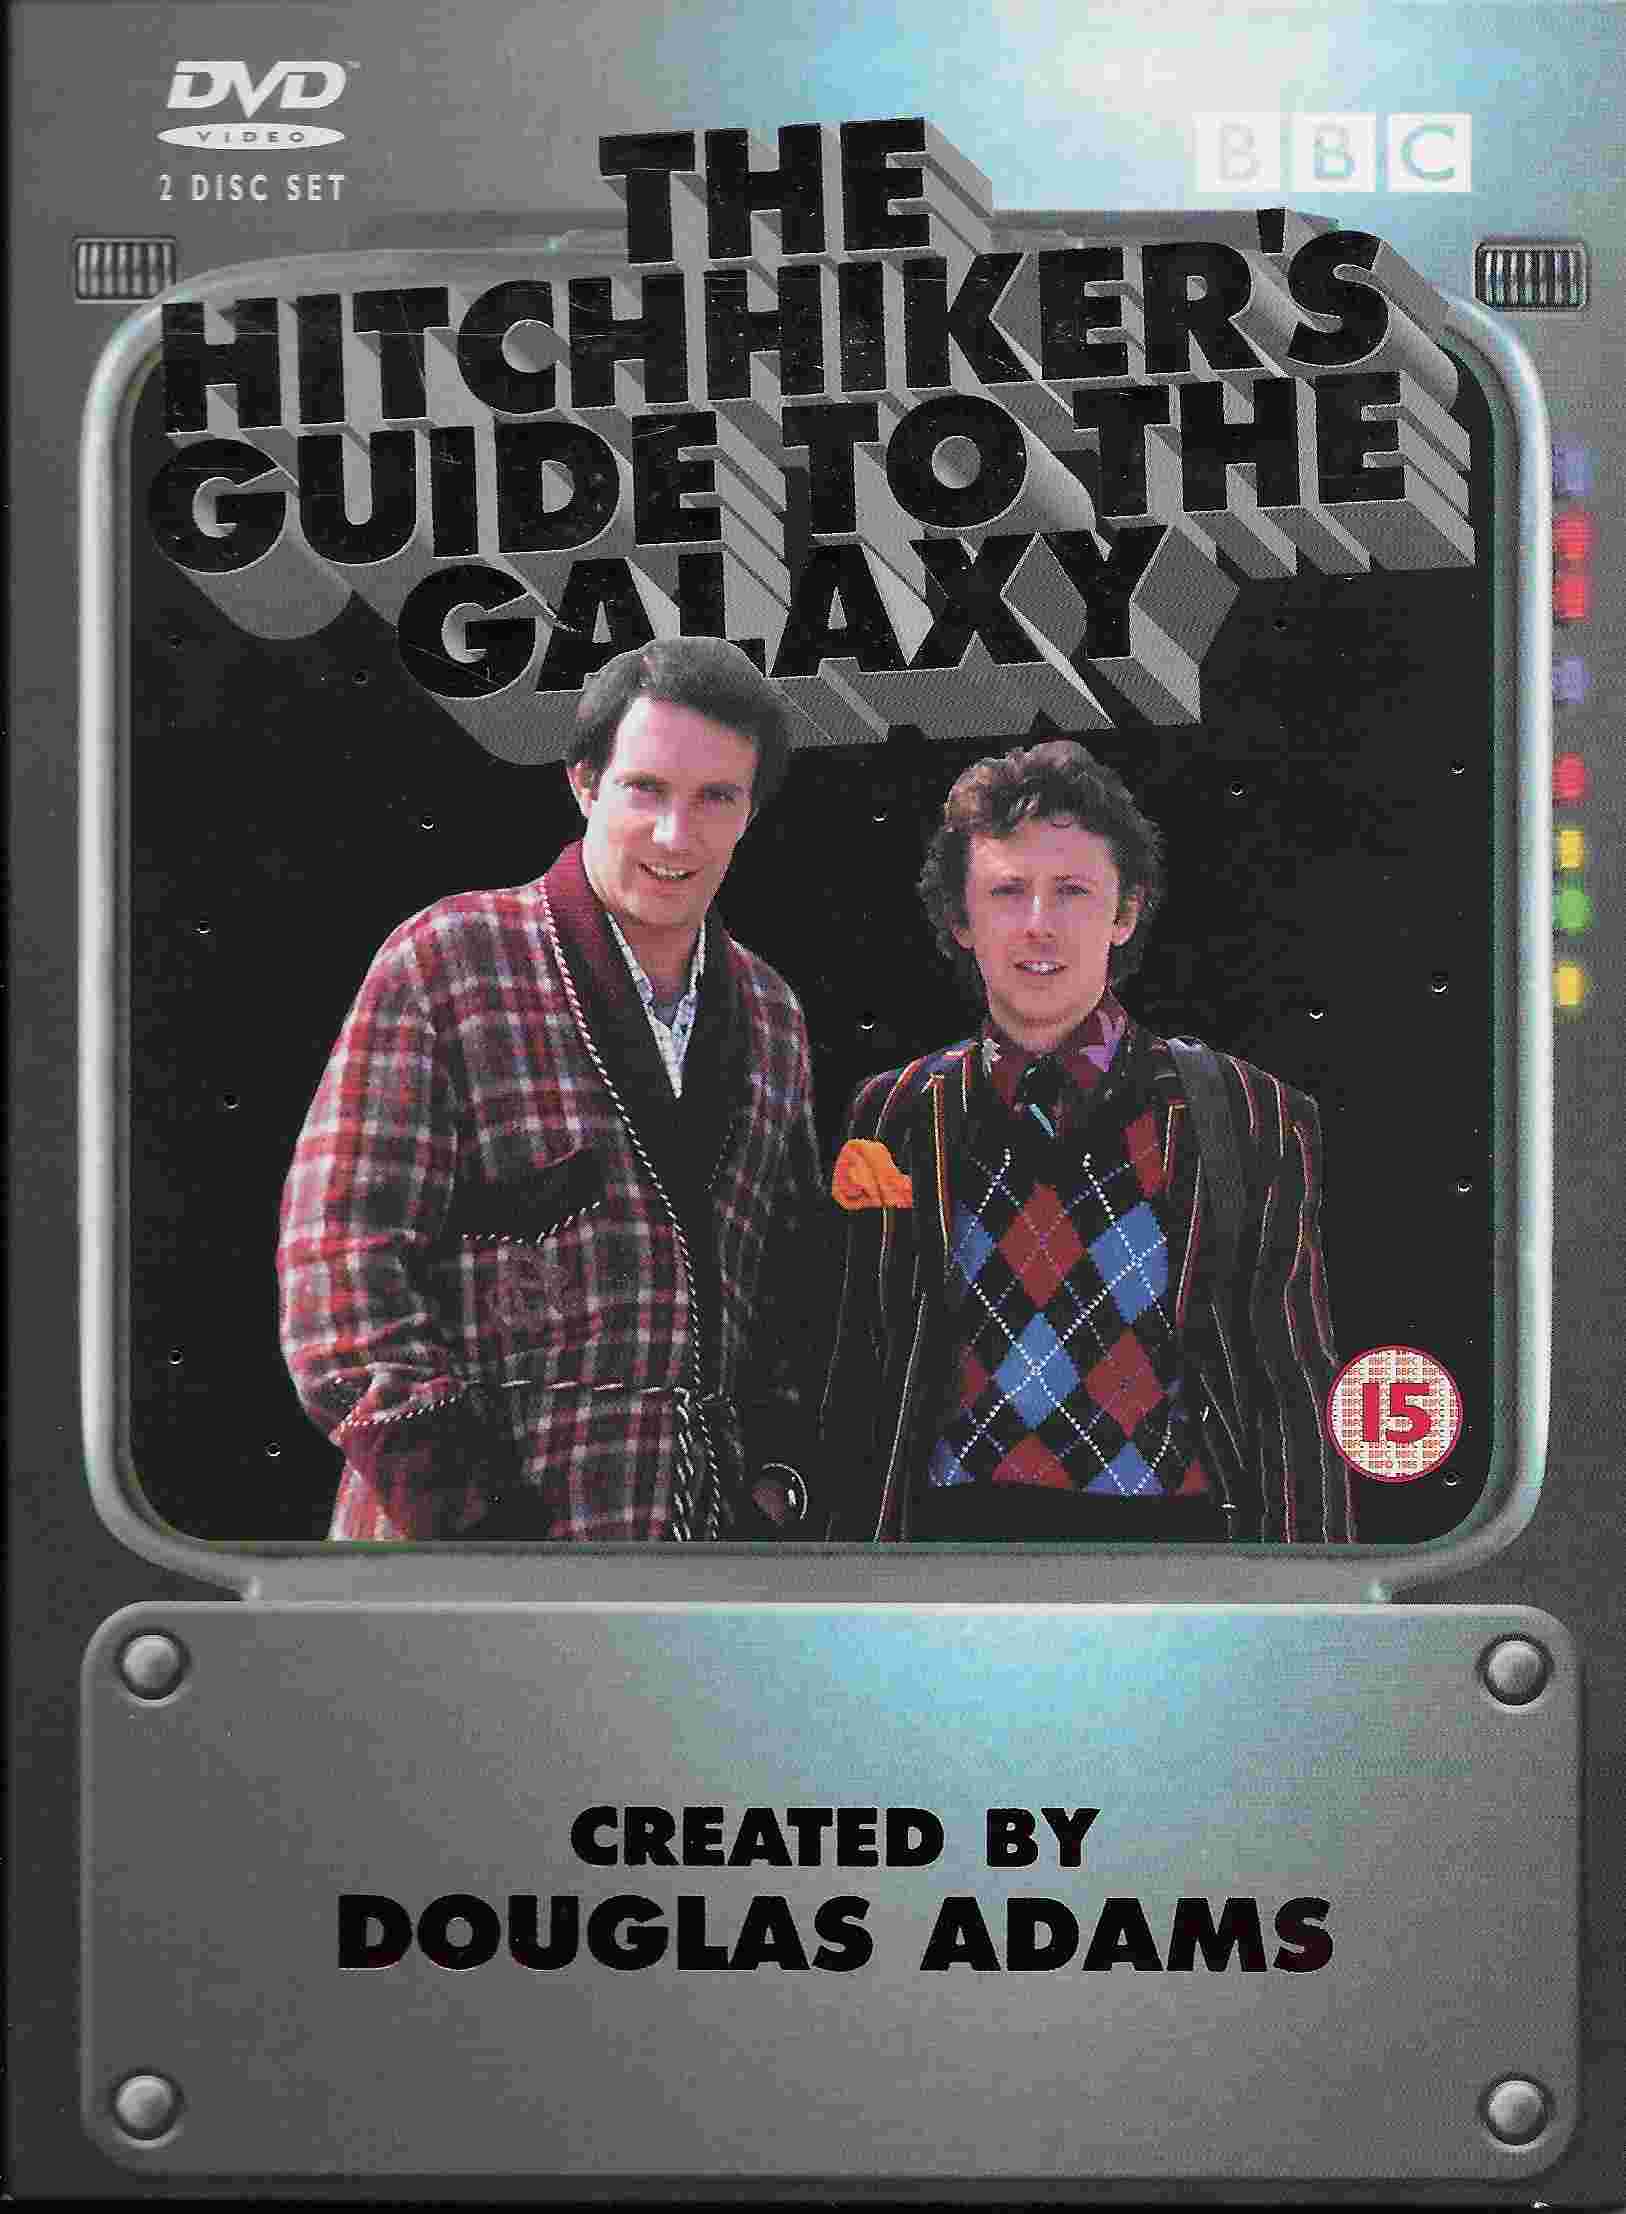 Picture of BBCDVD 1092 The hitch-hikers guide to the galaxy by artist Douglas Adams from the BBC dvds - Records and Tapes library